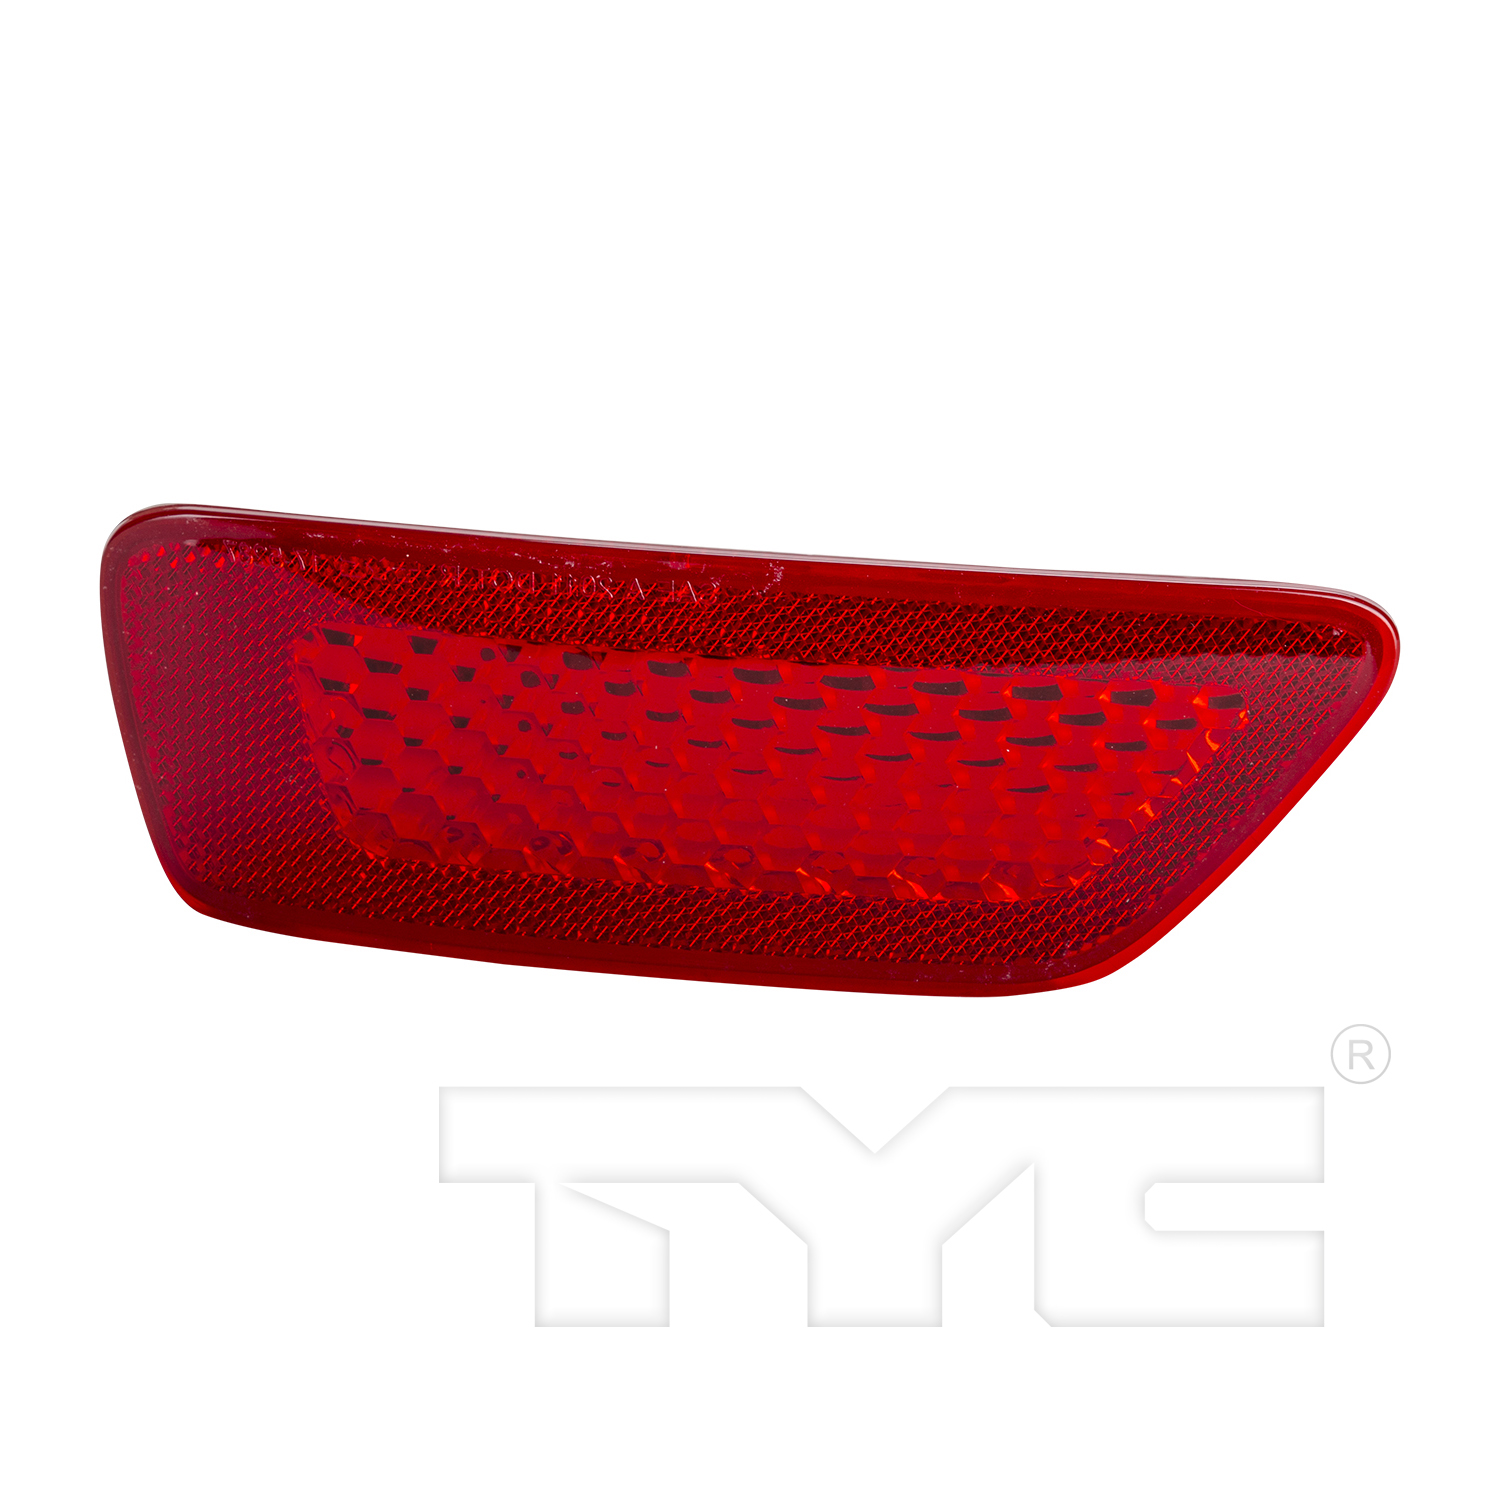 Aftermarket LAMPS for JEEP - GRAND CHEROKEE WK, GRAND CHEROKEE WK,22-22,LT Rear bumper reflector